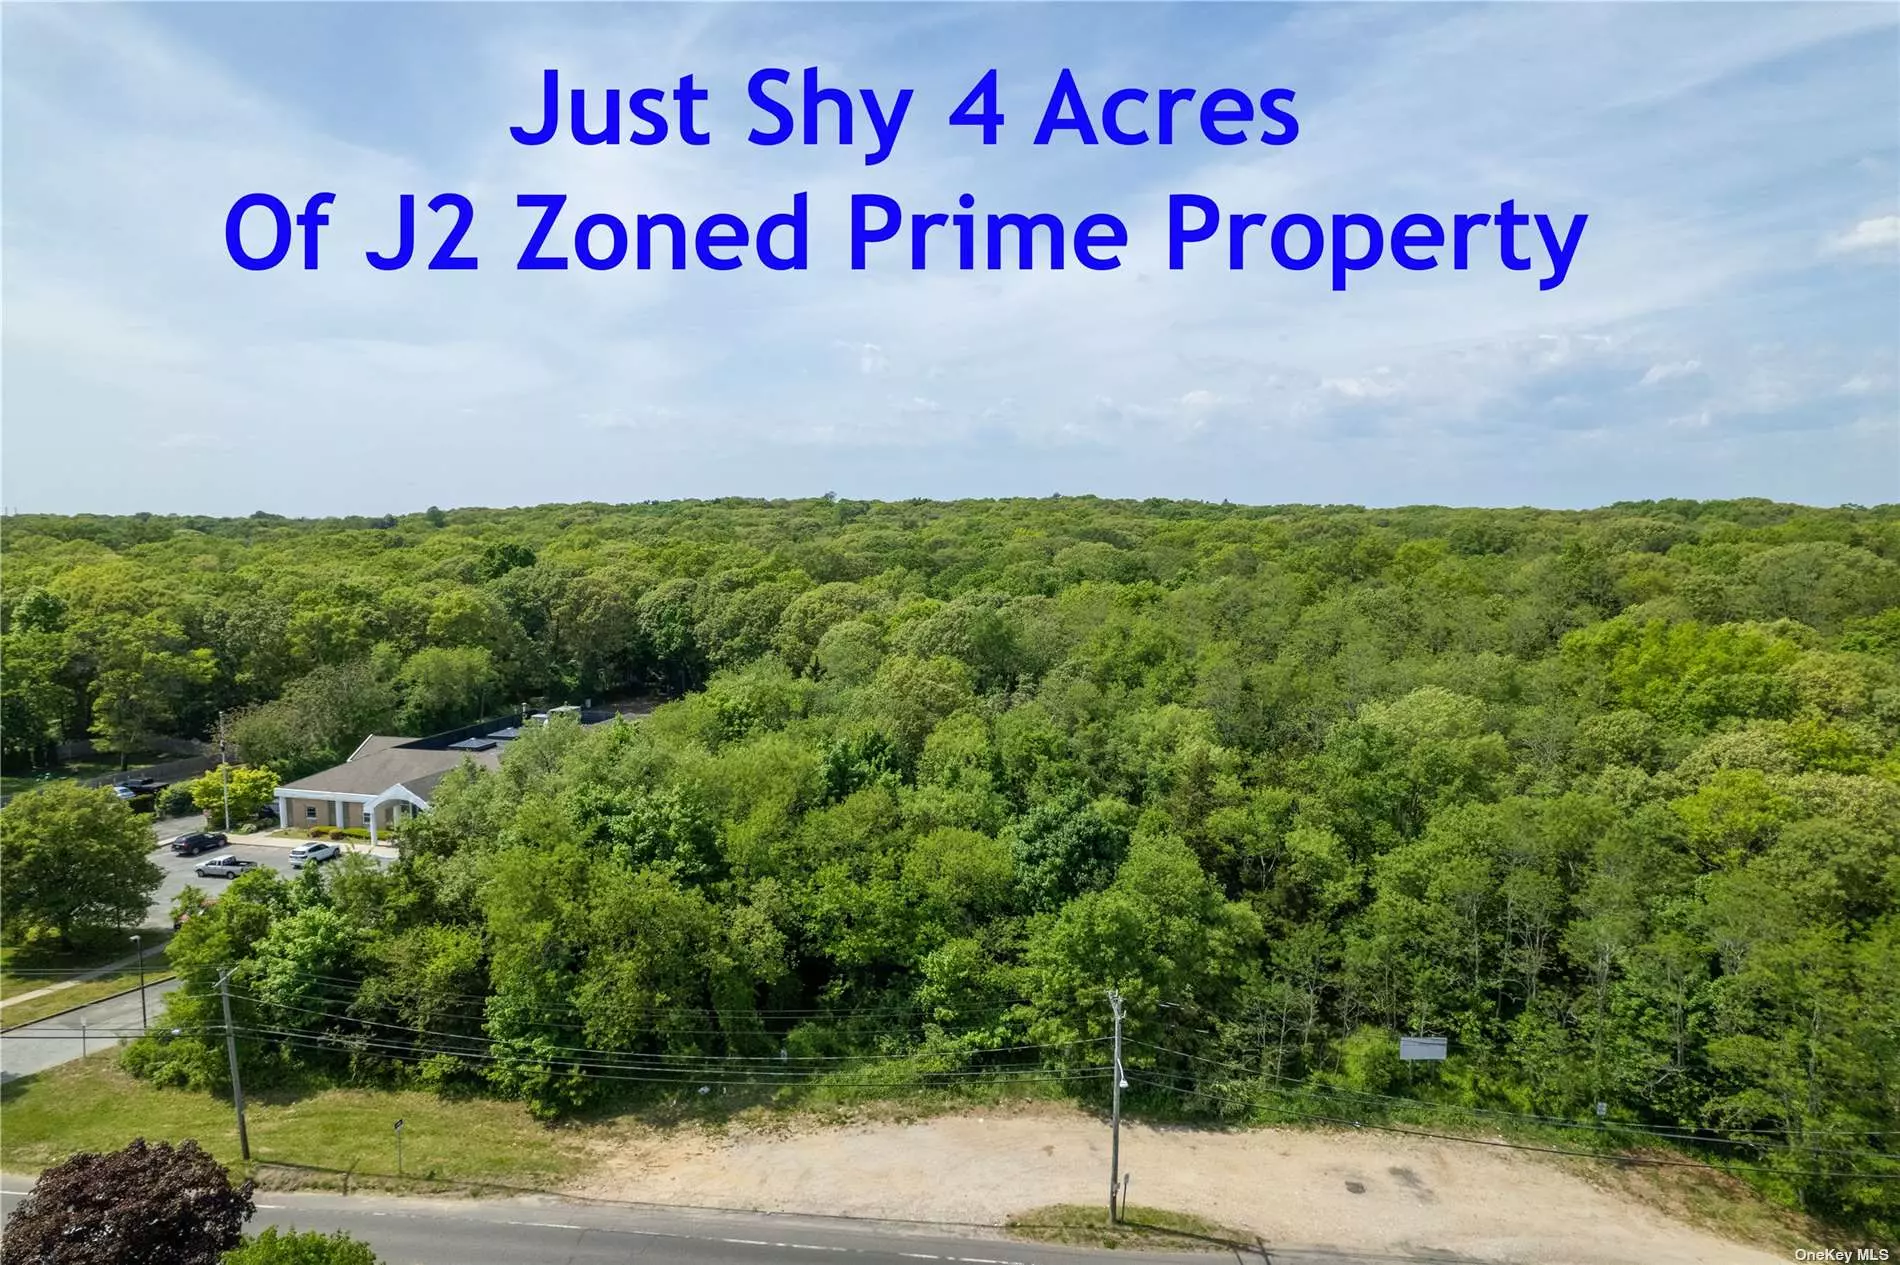 Amazing opportunity to own just shy of 4 Acres of J2 Zoned property. This property would be perfect for a Medical Park, Store Front, Bank, etc. Site Map done with up to 189 parking spots and multiple buildings. Aprox 665 feet of road frontage on Echo Ave. Already approved for 600 gallons per day per acre for septic. And 22, 825 sq. ft for buildings.